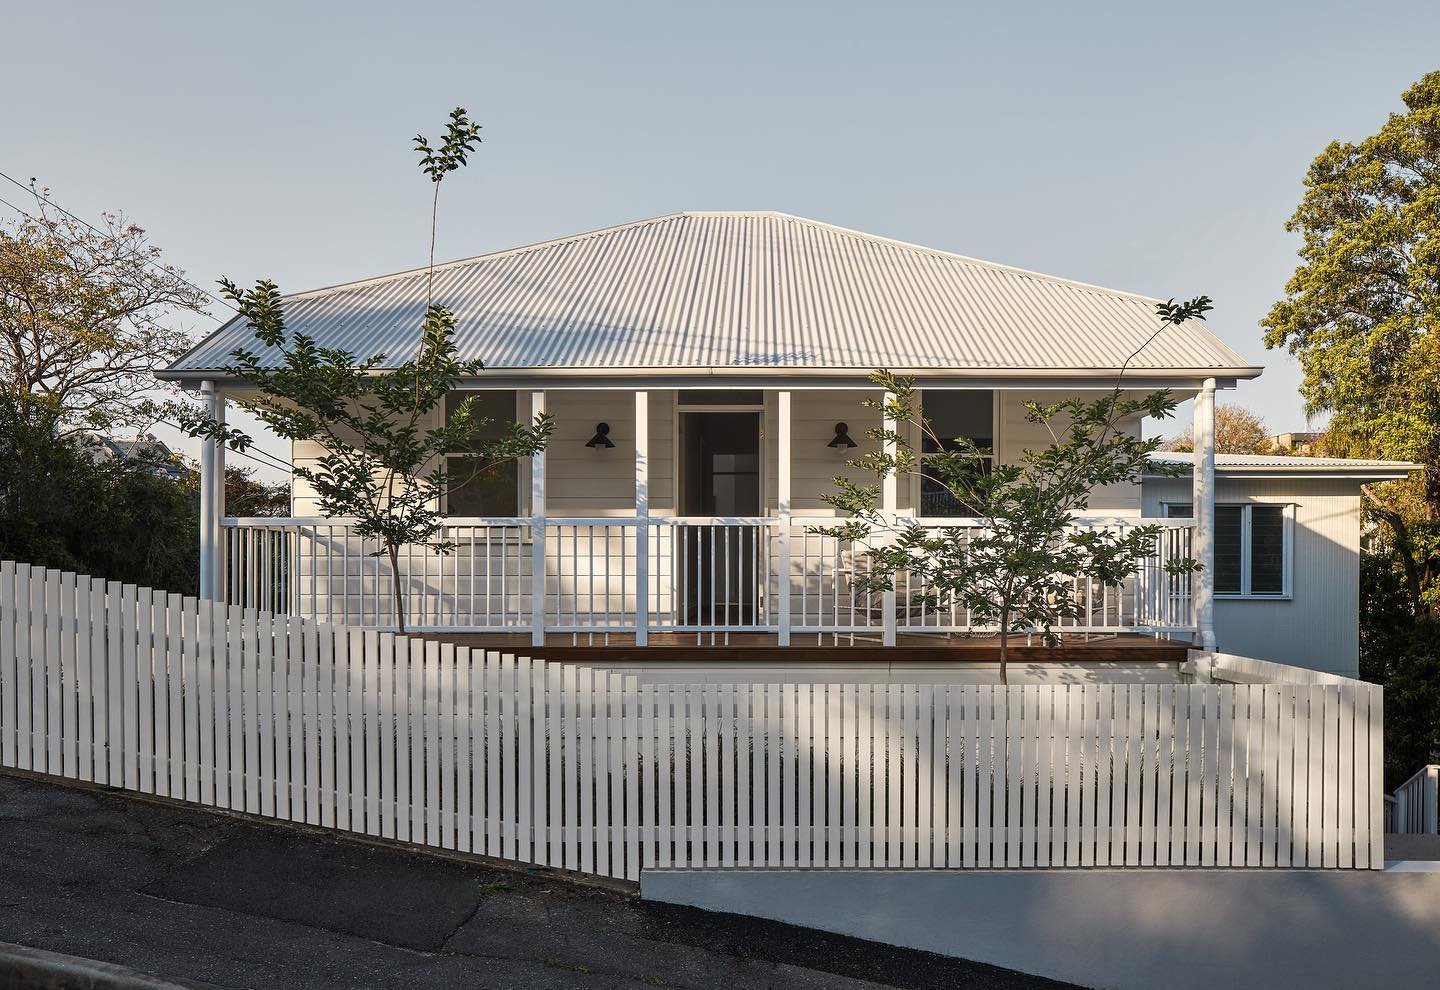 A cute cottage was always in this Queenslander. With a lot of TLC we brought this little gem back to life. Swipe to see the before of this project. 

Completed project captured by @andymacpherson.studio 

#residentialarchitecture #queenslandarchitect